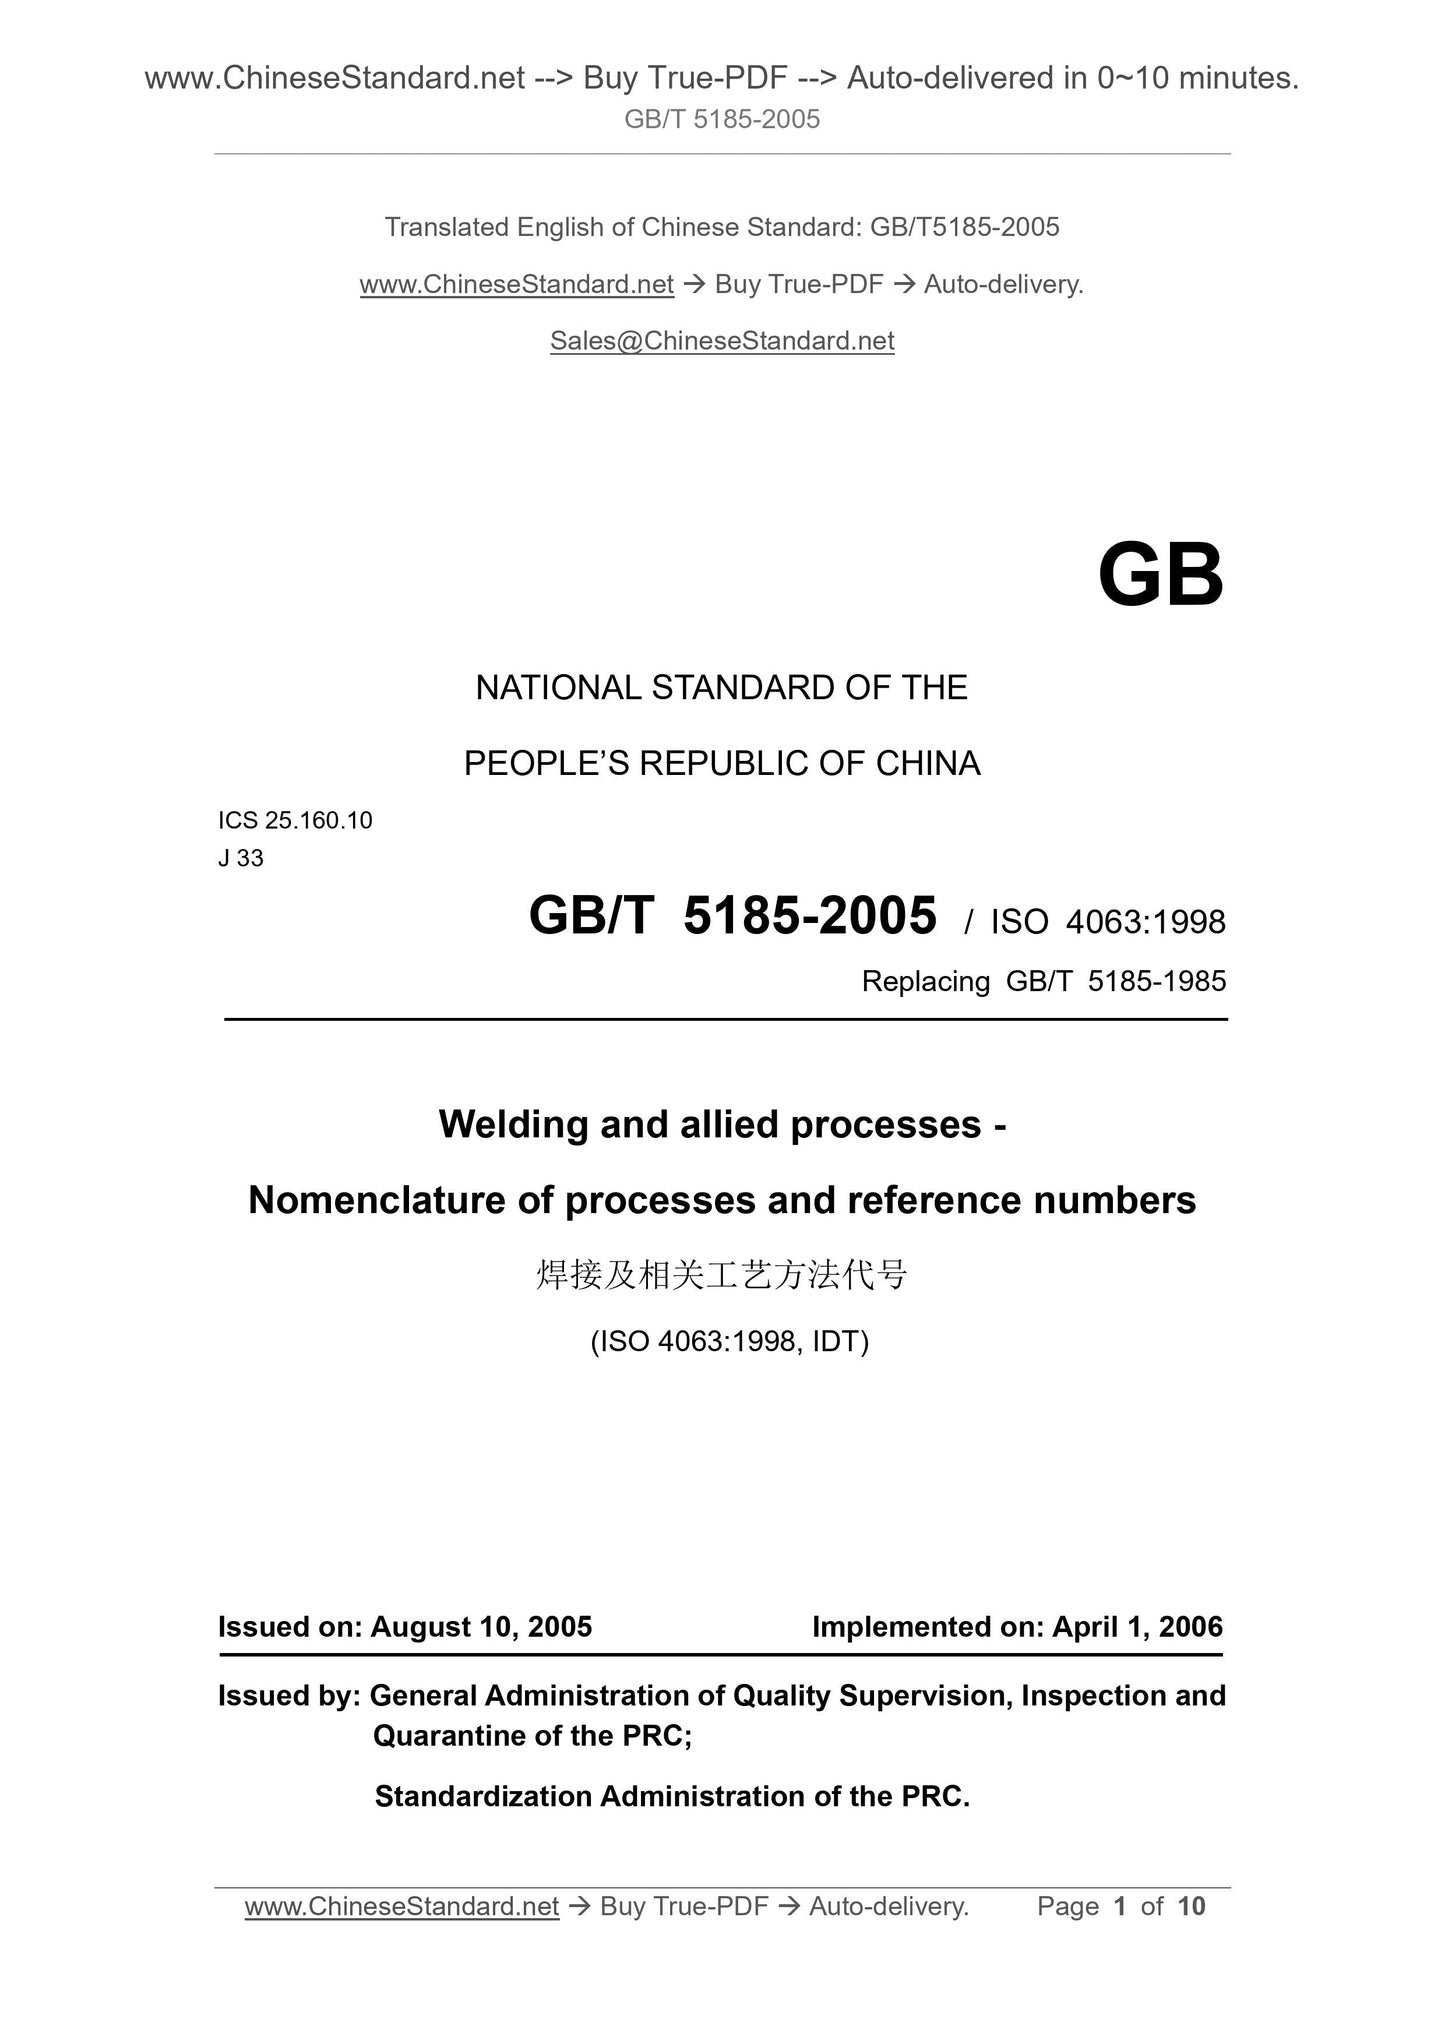 GB/T 5185-2005 Page 1